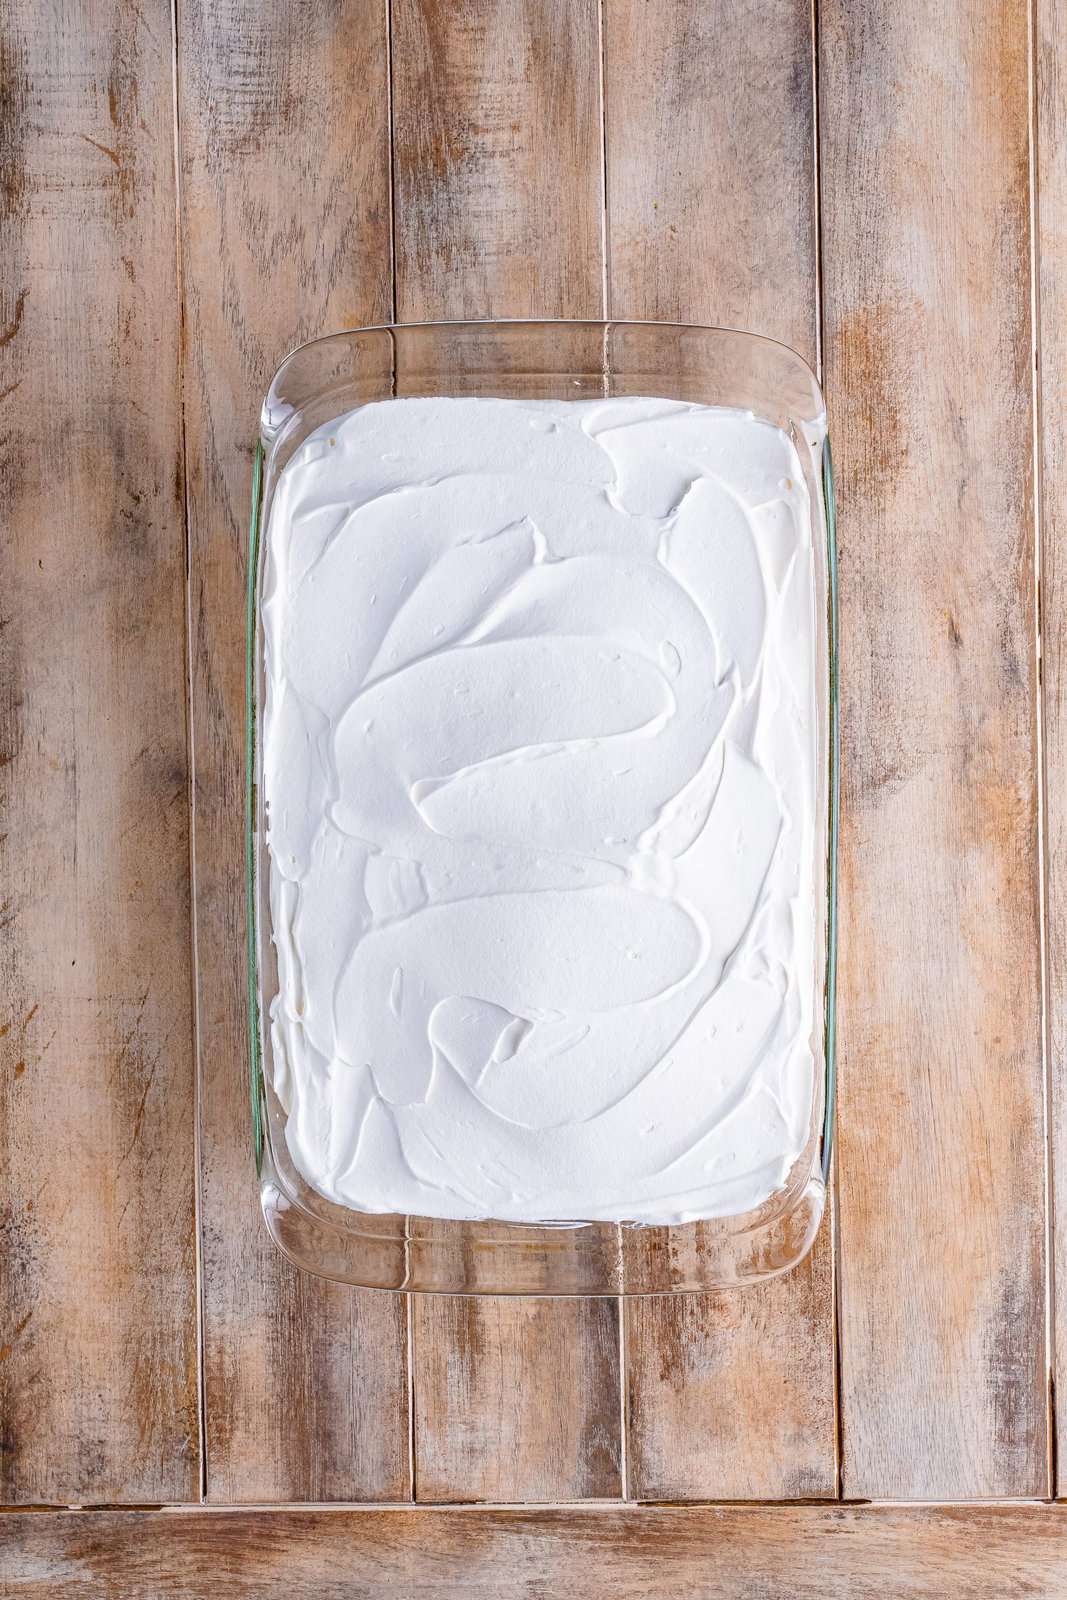 whipped cream spread over the baked cake. 